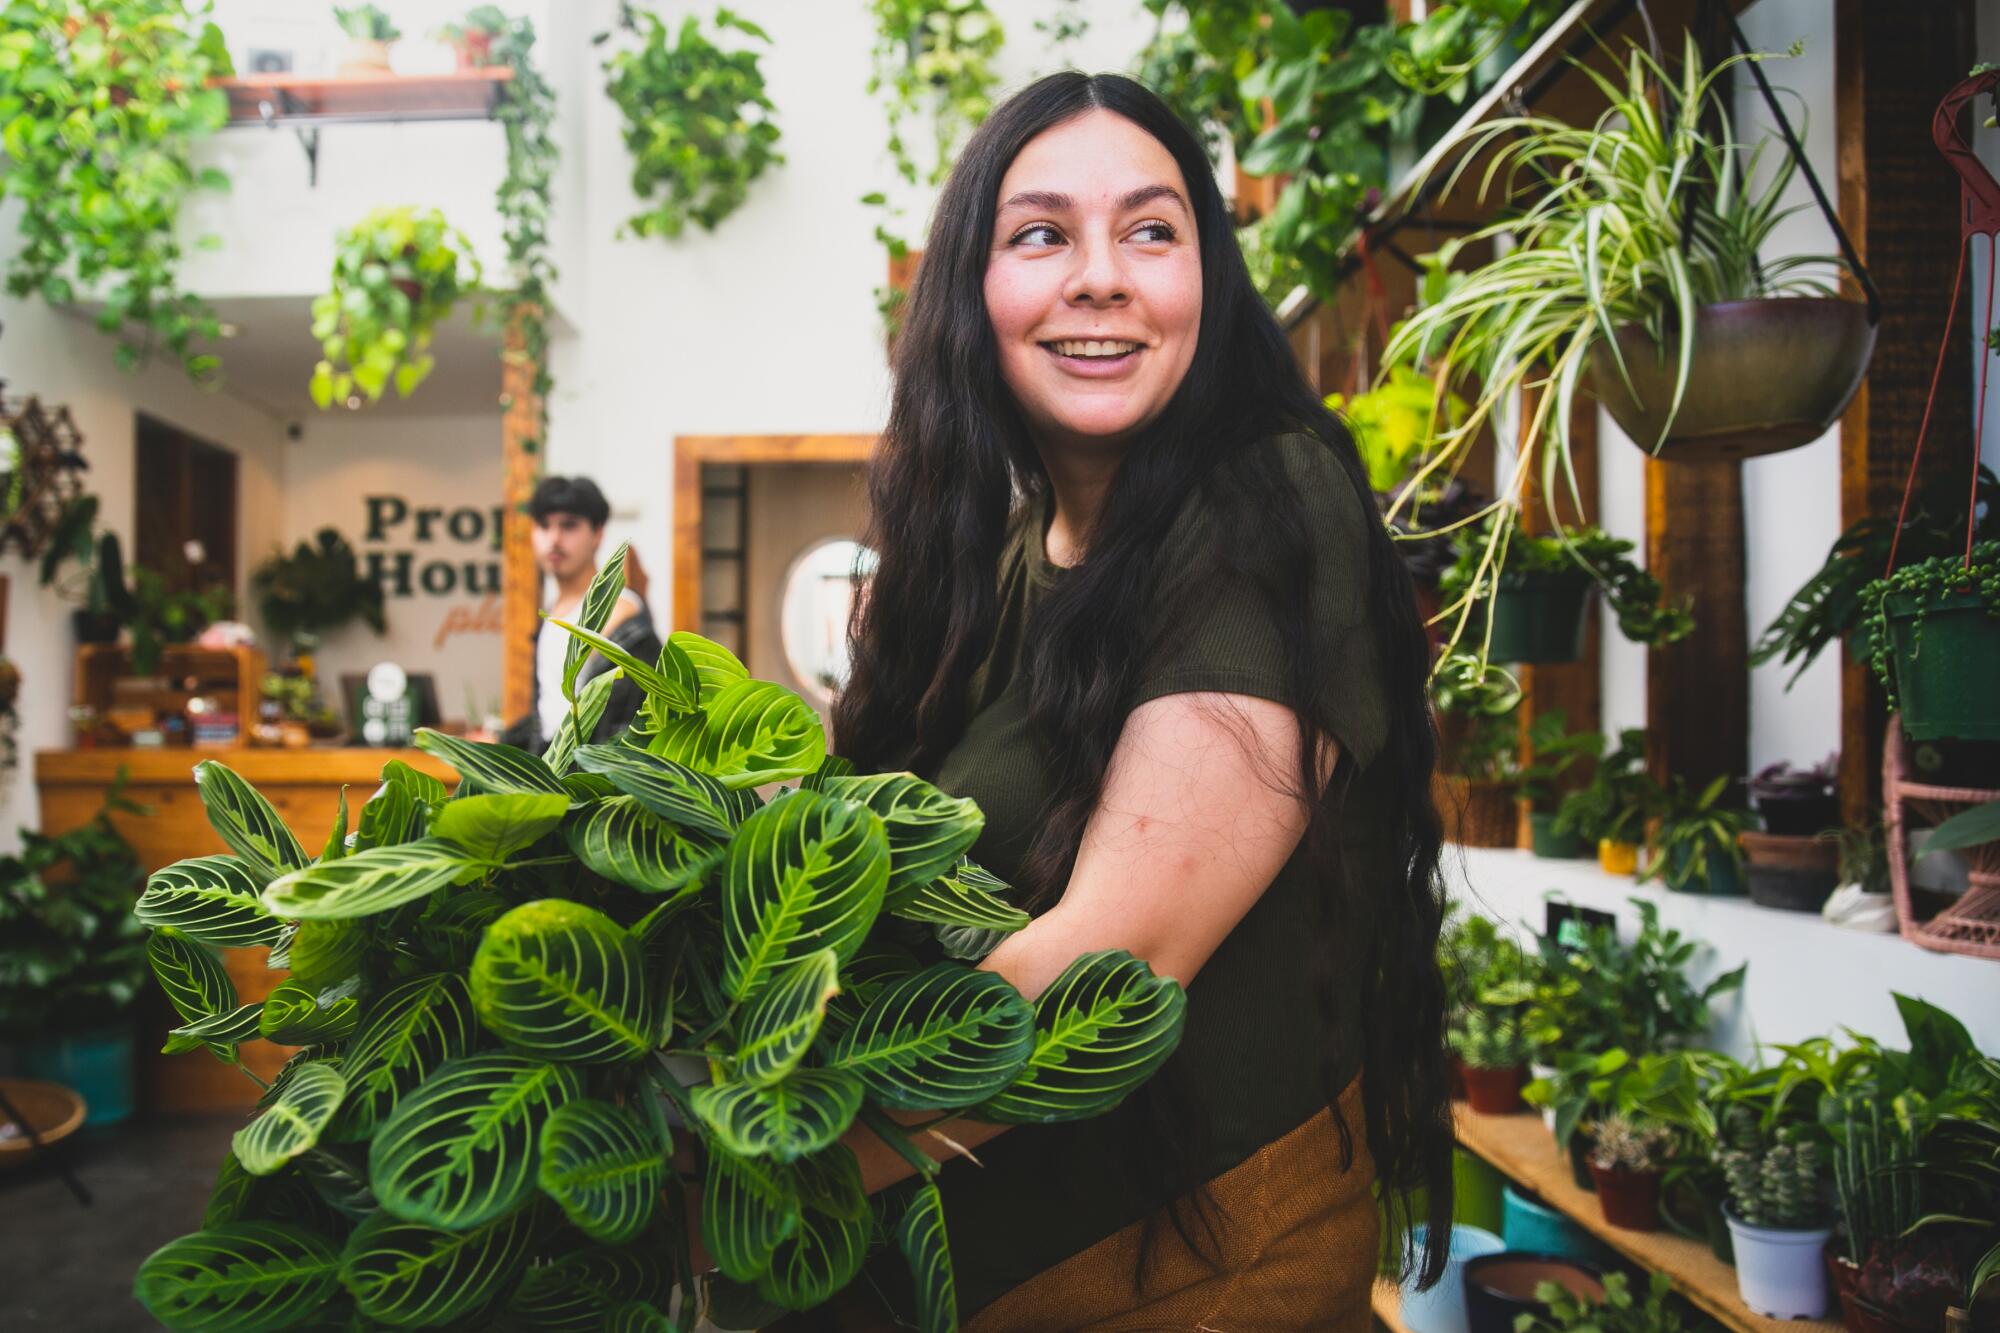 A young woman with long, dark hair smiles while holding a green plant.